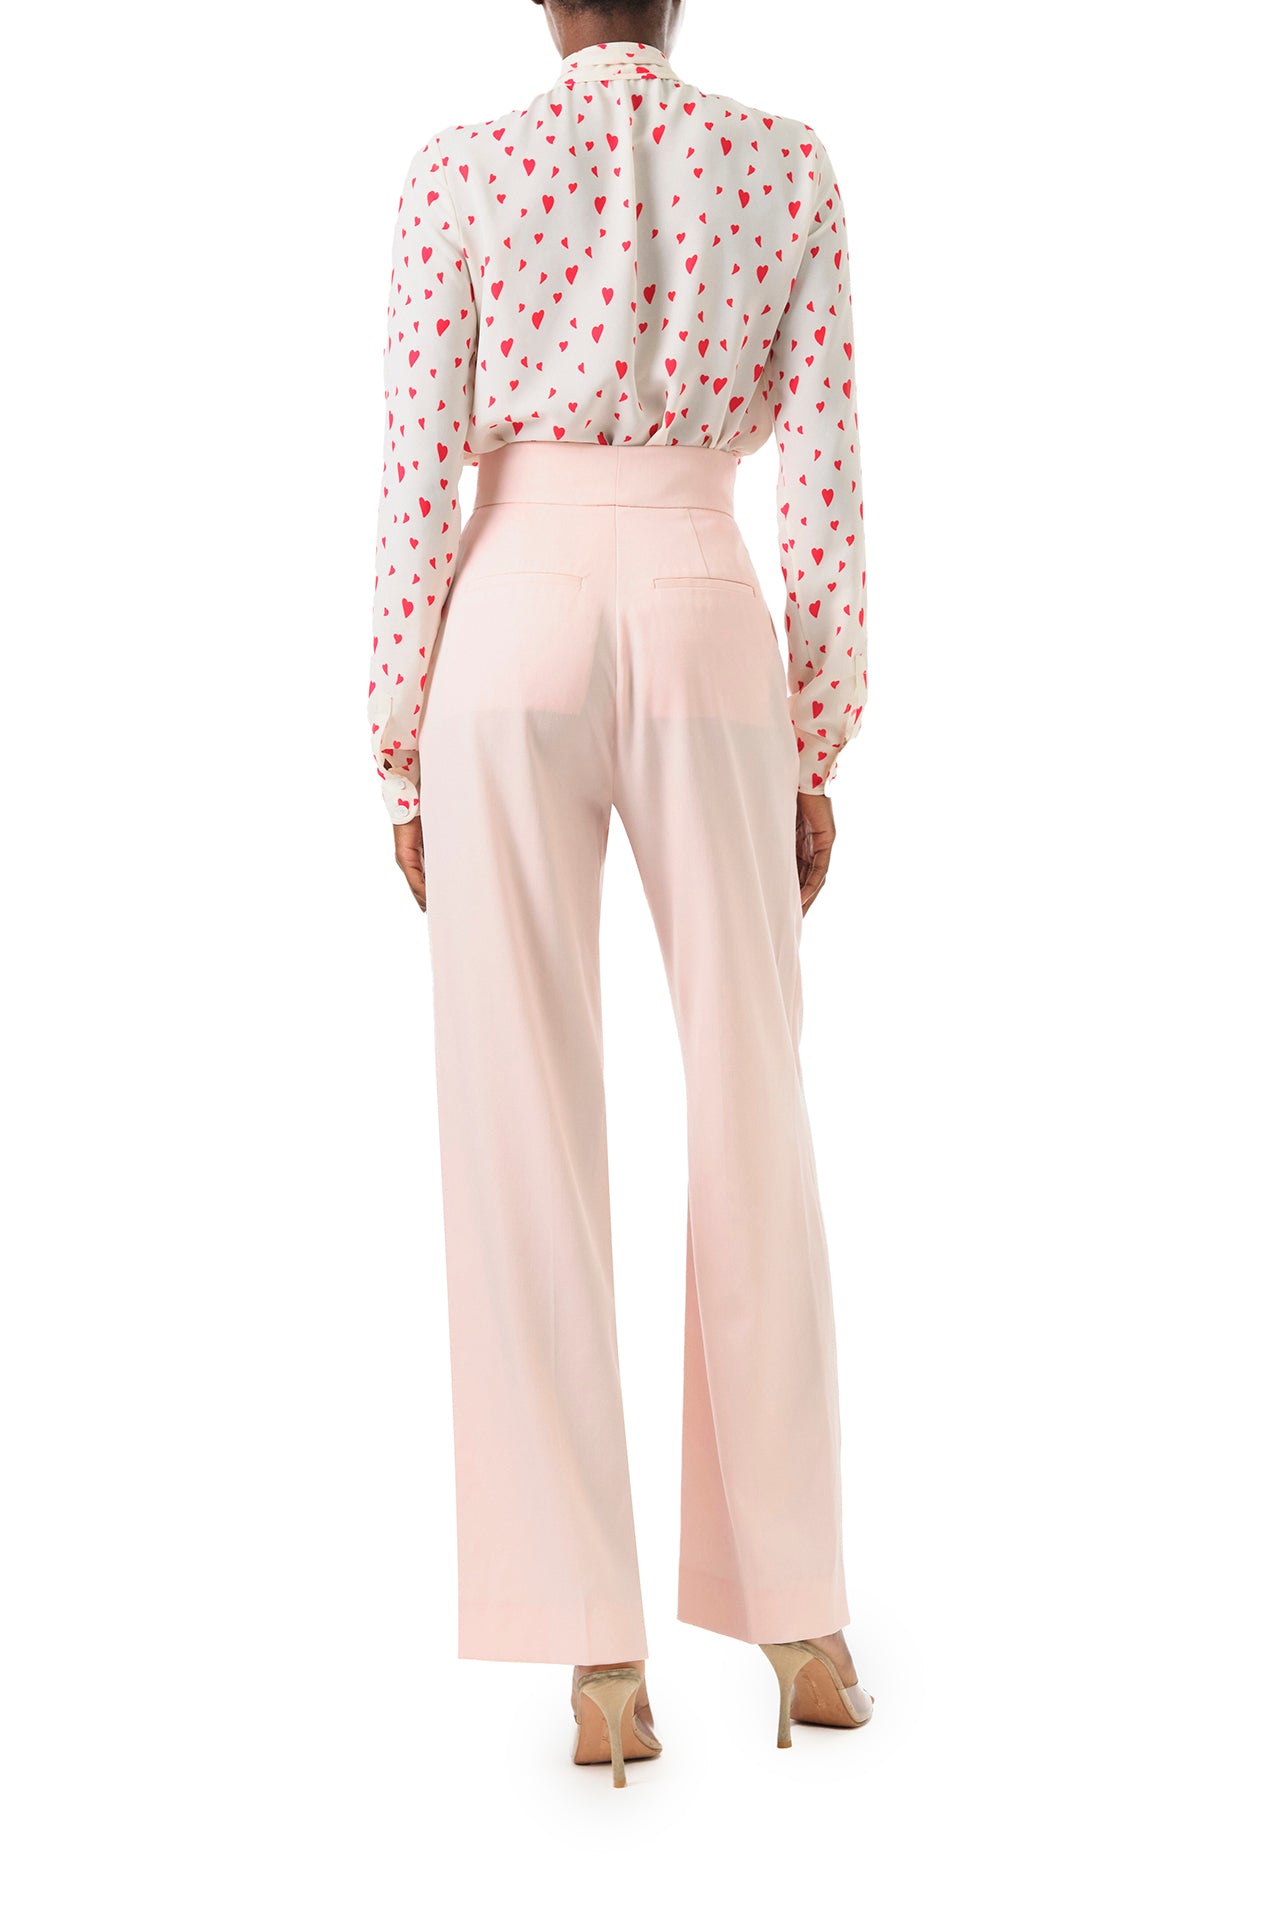 Monique Lhuillier Fall 2024 long sleeve, bow tie blouse in Heart Printed Georgette - back.